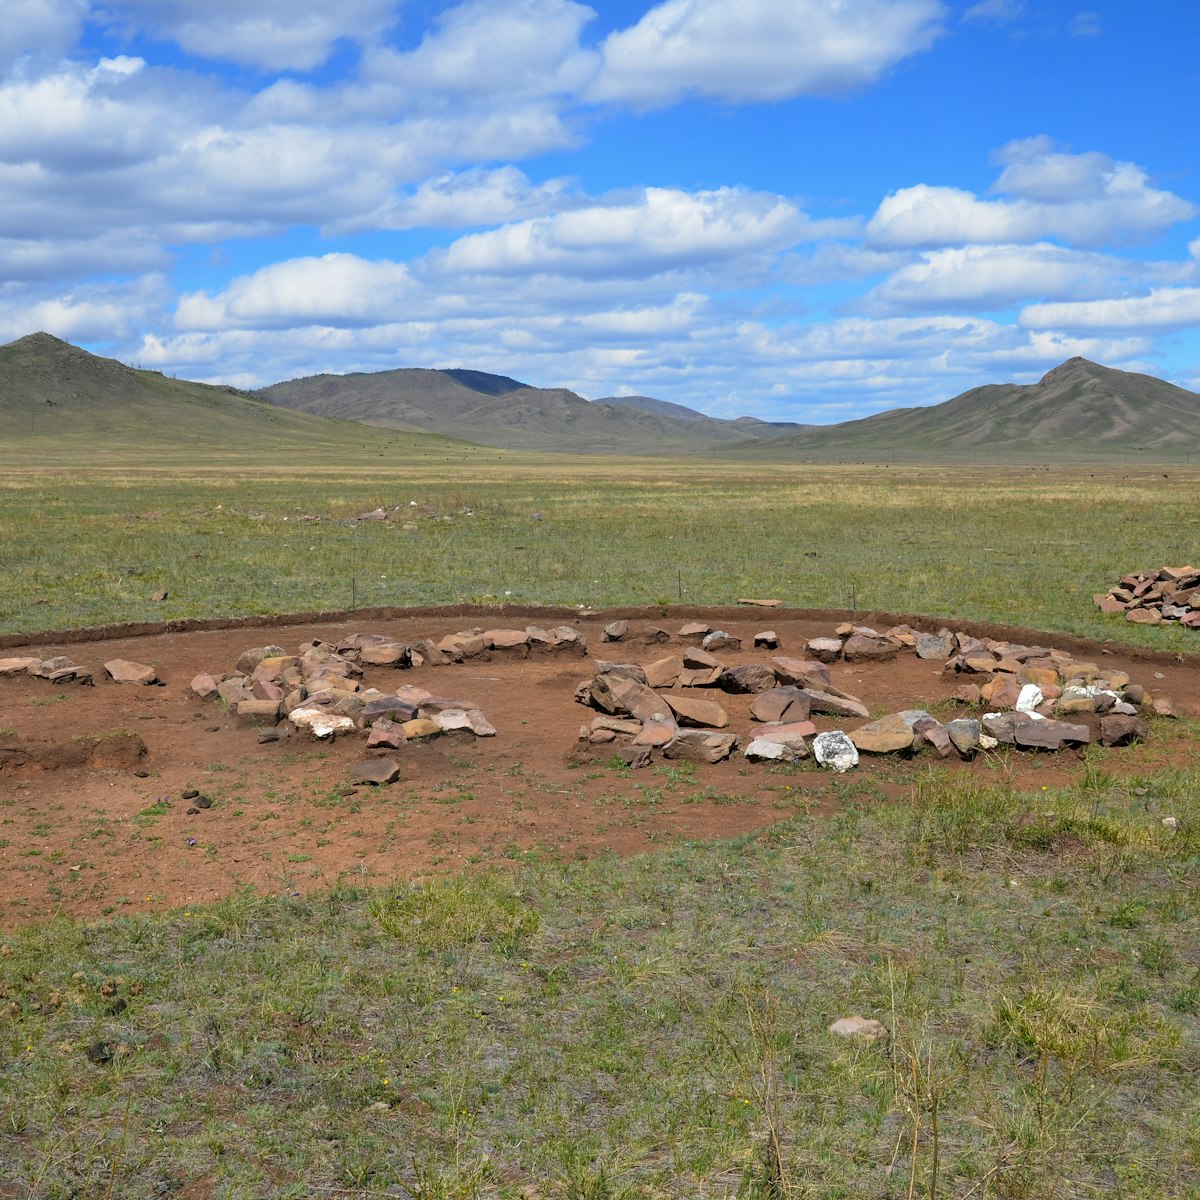 Archeological excavation of ancient kurgan burials, King's valley, Tuva, Russia.